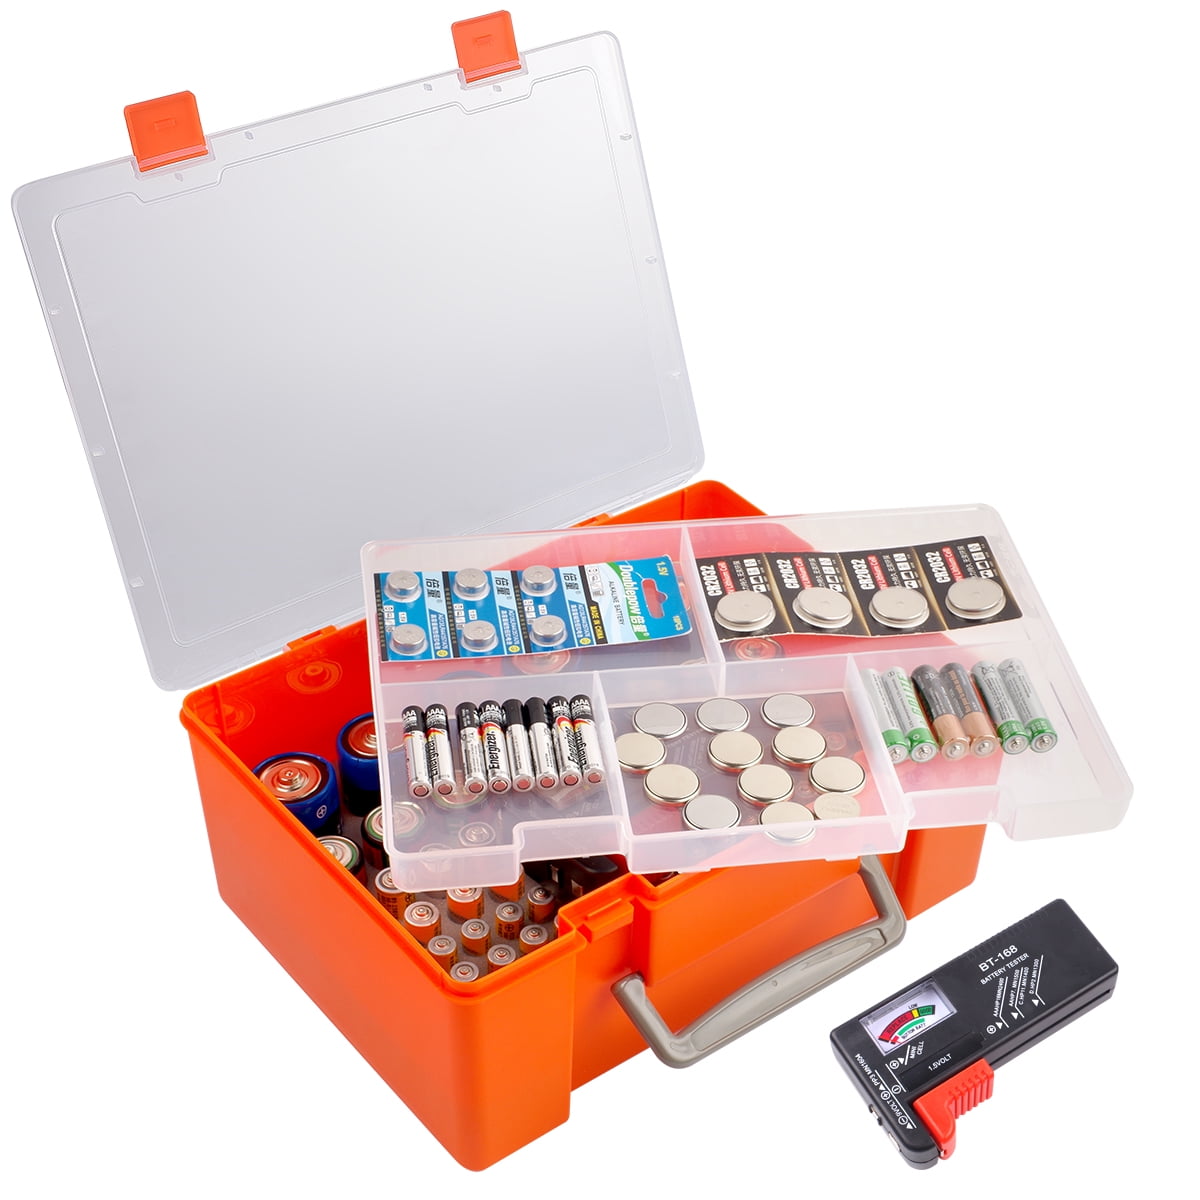 Battery Organizer Storage Holder Box Case with Tester Checker Box Only 162 Batteries Variety Pack Container Holds AA AAA 4A C D 9V 3V Lithium LR44 CR2 CR123 CR1632 CR2032 18650 Button 